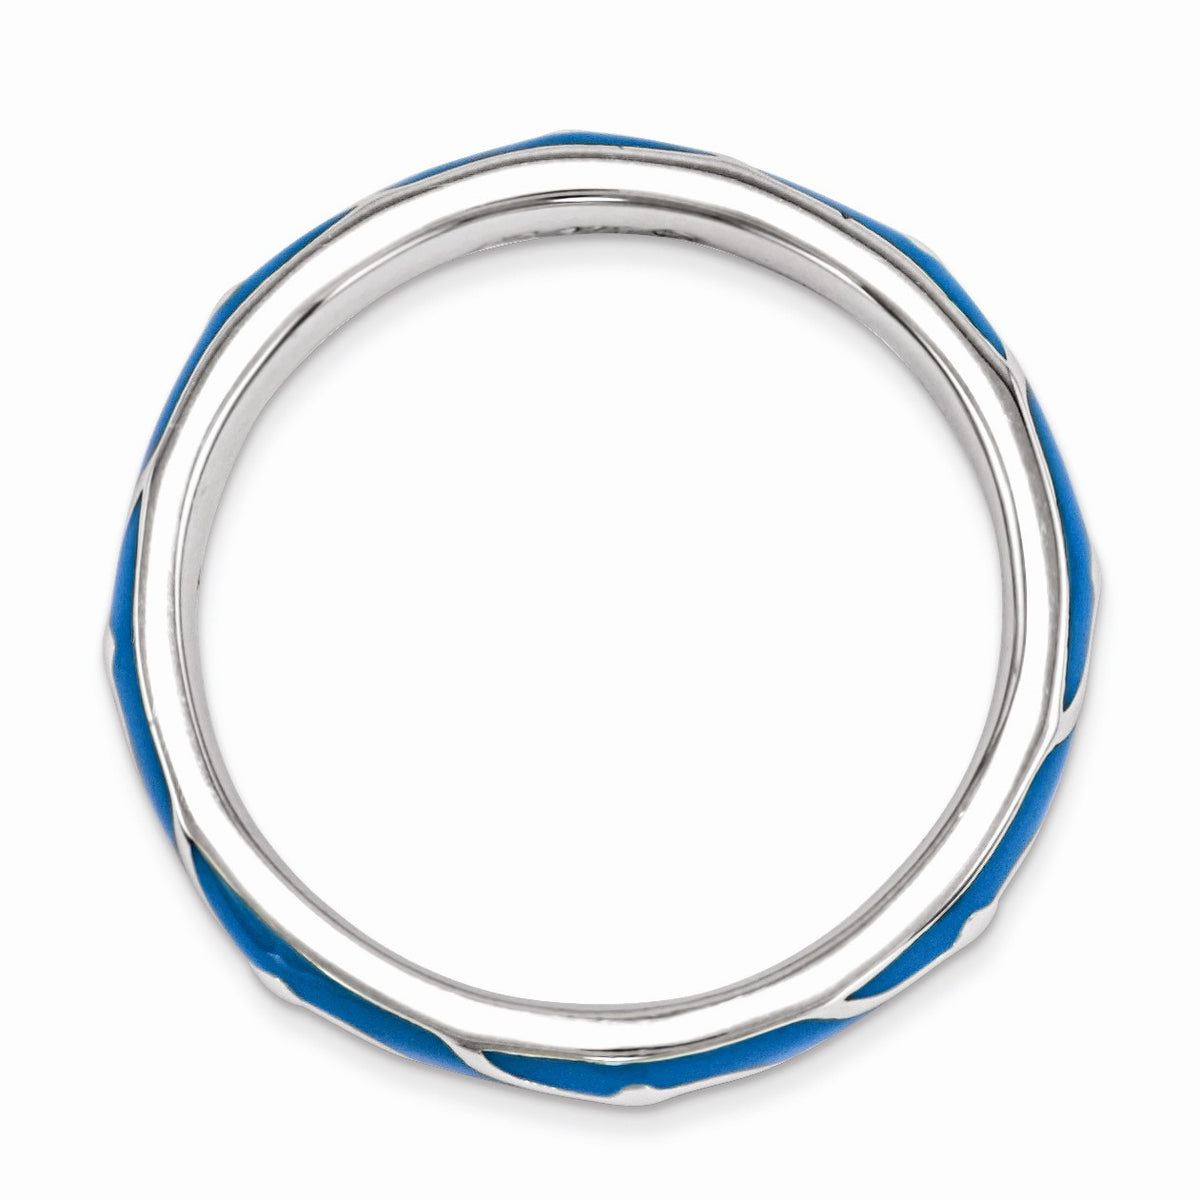 Alternate view of the 2.5mm Sterling Silver Stackable Expressions Blue Enamel Band by The Black Bow Jewelry Co.